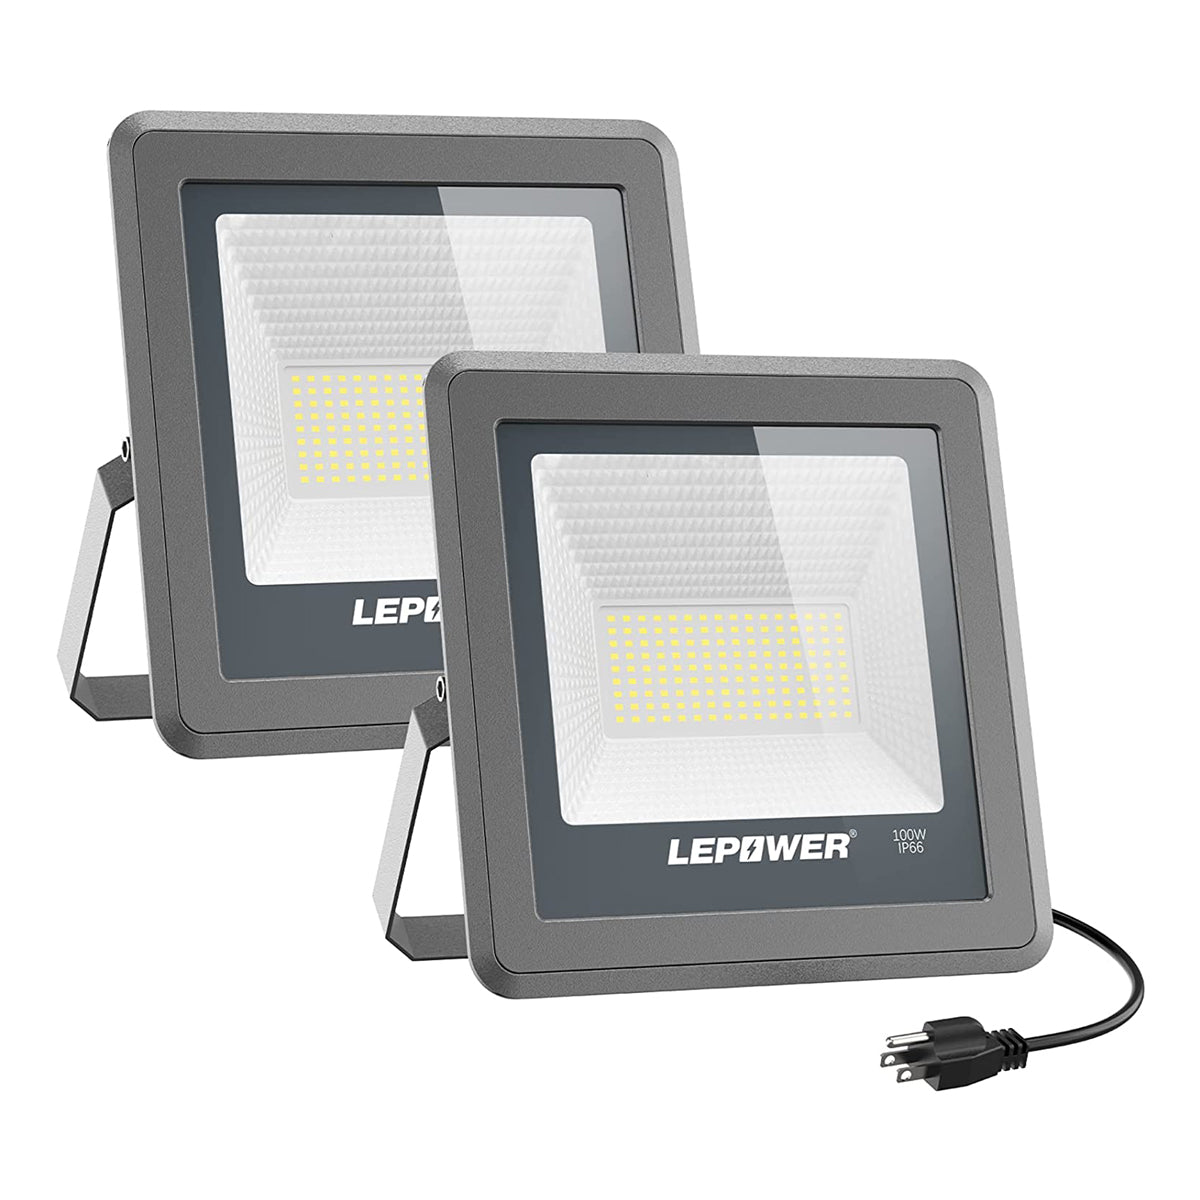 50W/100W Outdoor Flood LED Light with Plug 5000lm/10000lm - 2 Pack